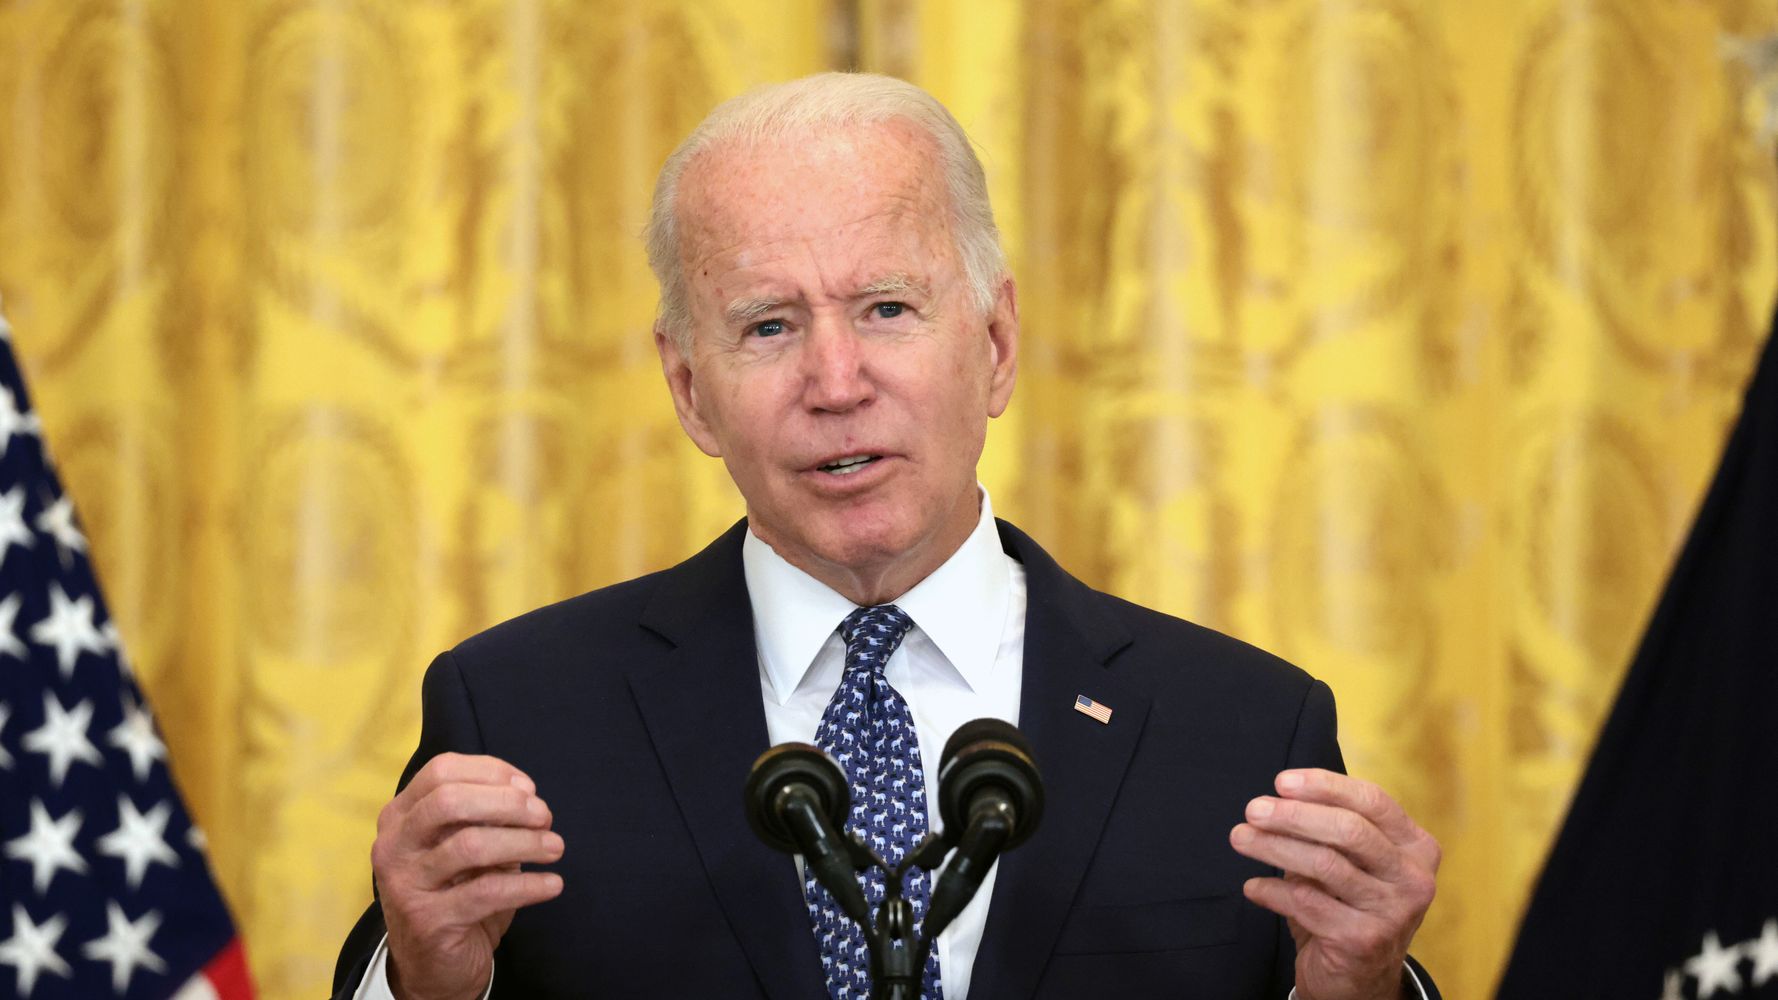 Biden Requiring Federal Workers To Get COVID Shot: AP Source